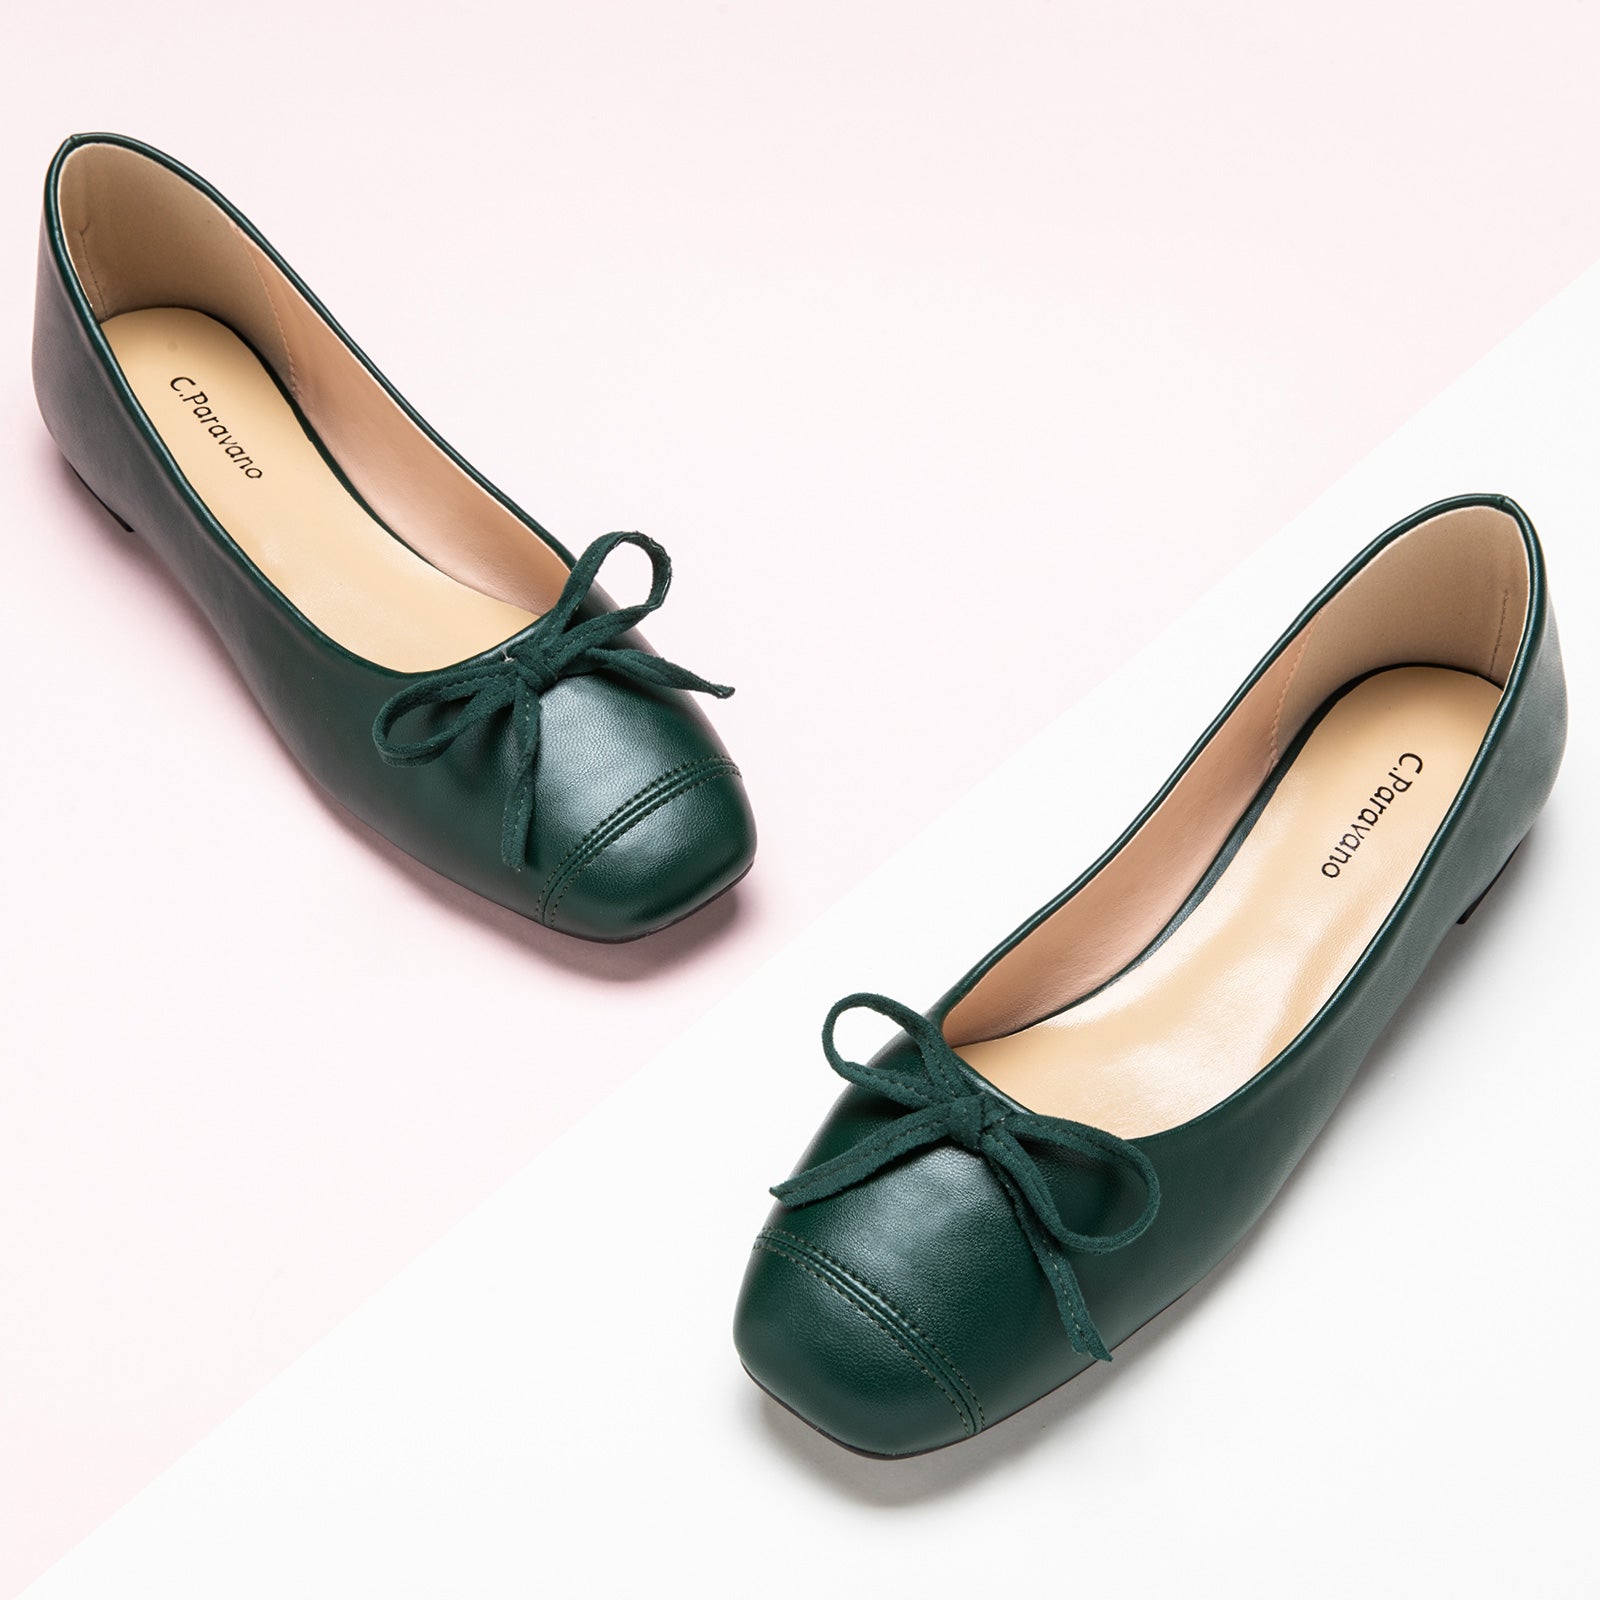 Dark Green Suede Toe Bowknot Ballet Flats, a vibrant and eye-catching choice for a bold and stylish look